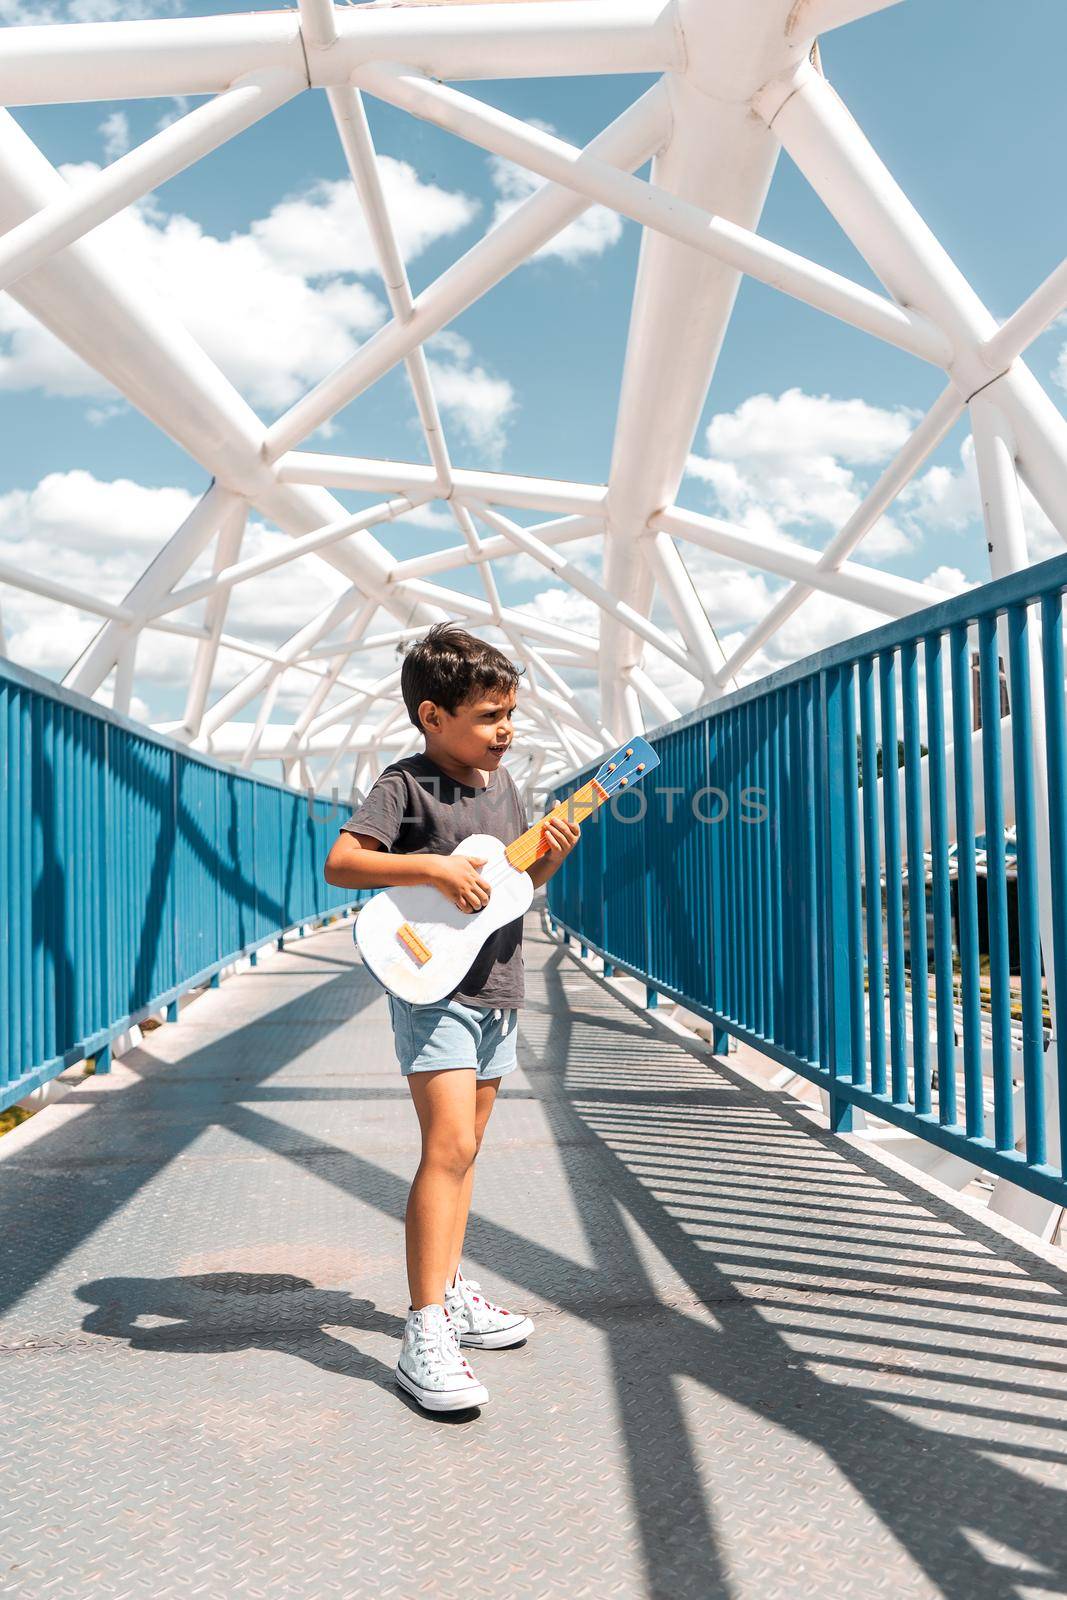 Latin boy playing a ukulele in the middle of a bridge in Nicaragua by cfalvarez